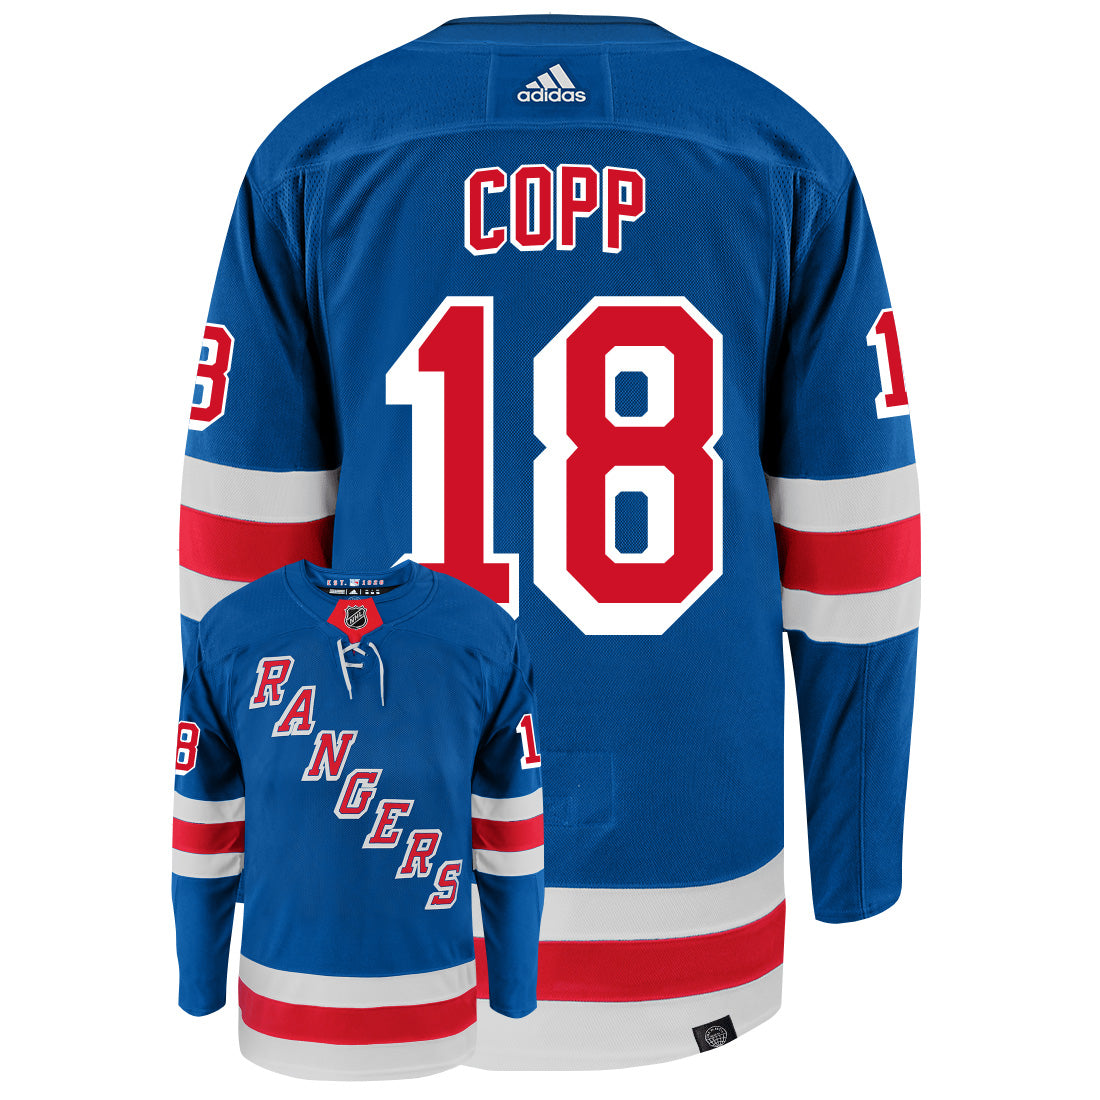 Andrew Copp New York Rangers Adidas Primegreen Authentic Home NHL Hockey Jersey - Back/Front View